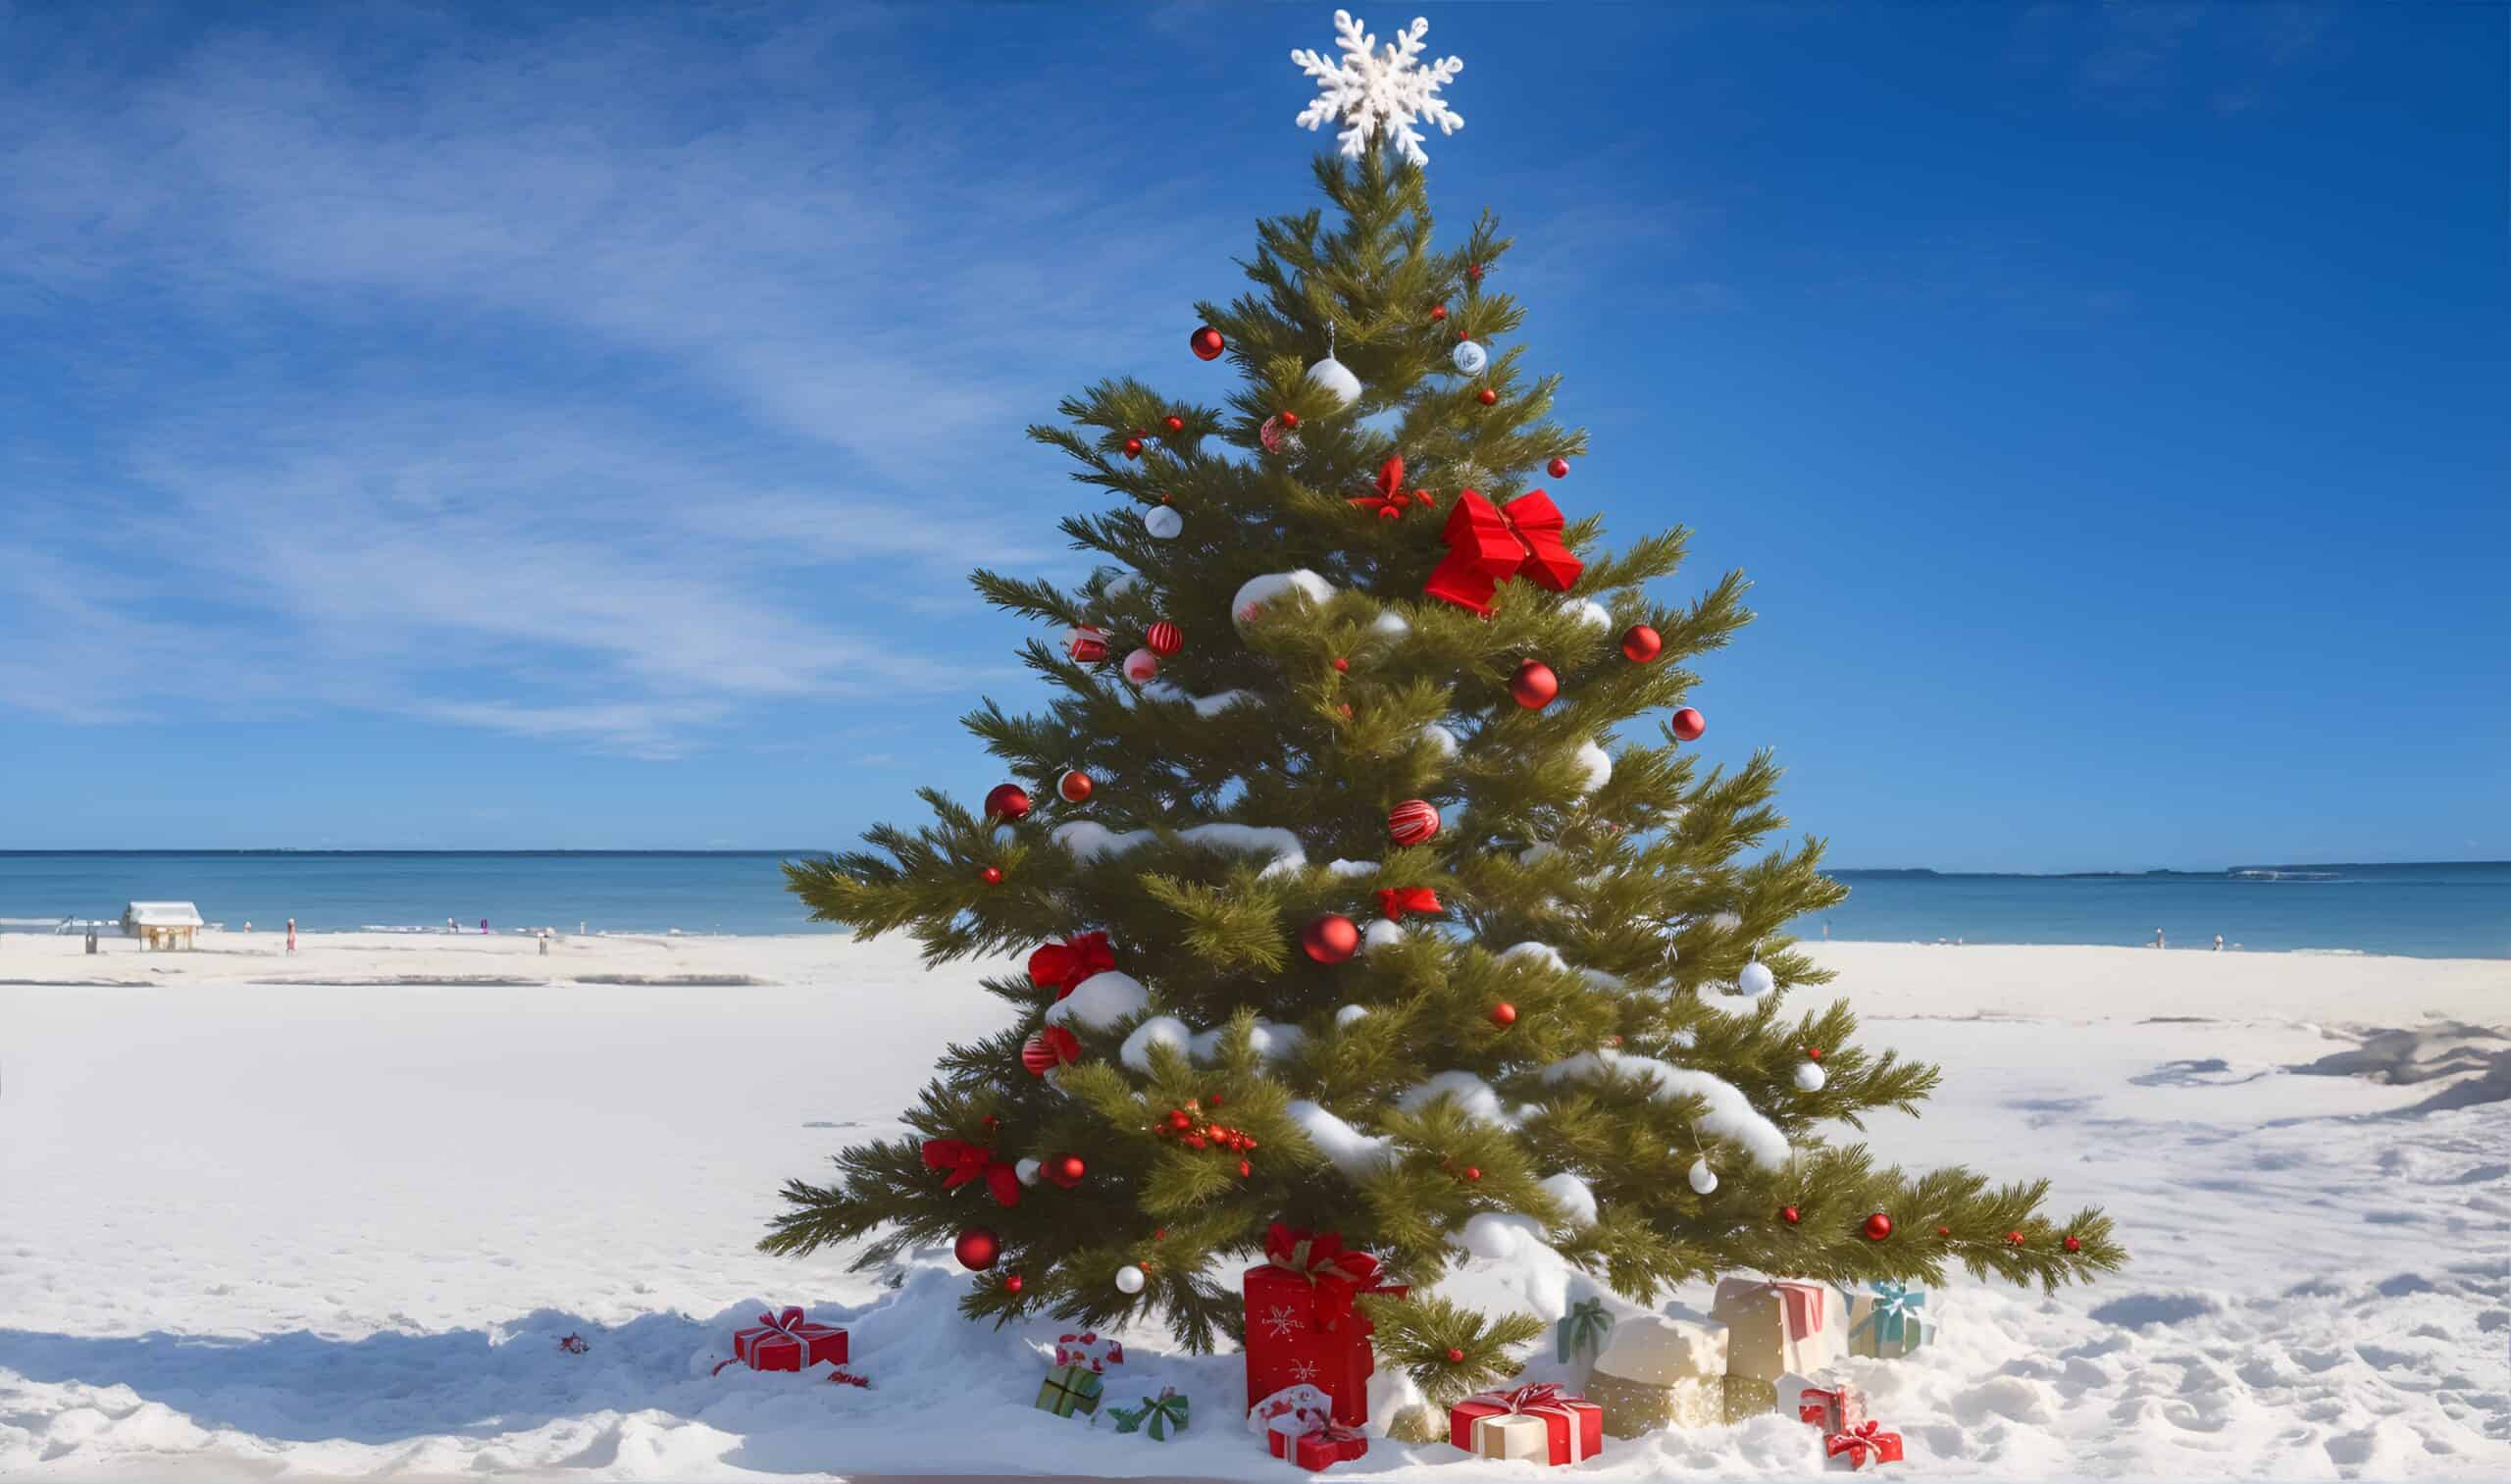 A Christmas tree at a beach in the summer.